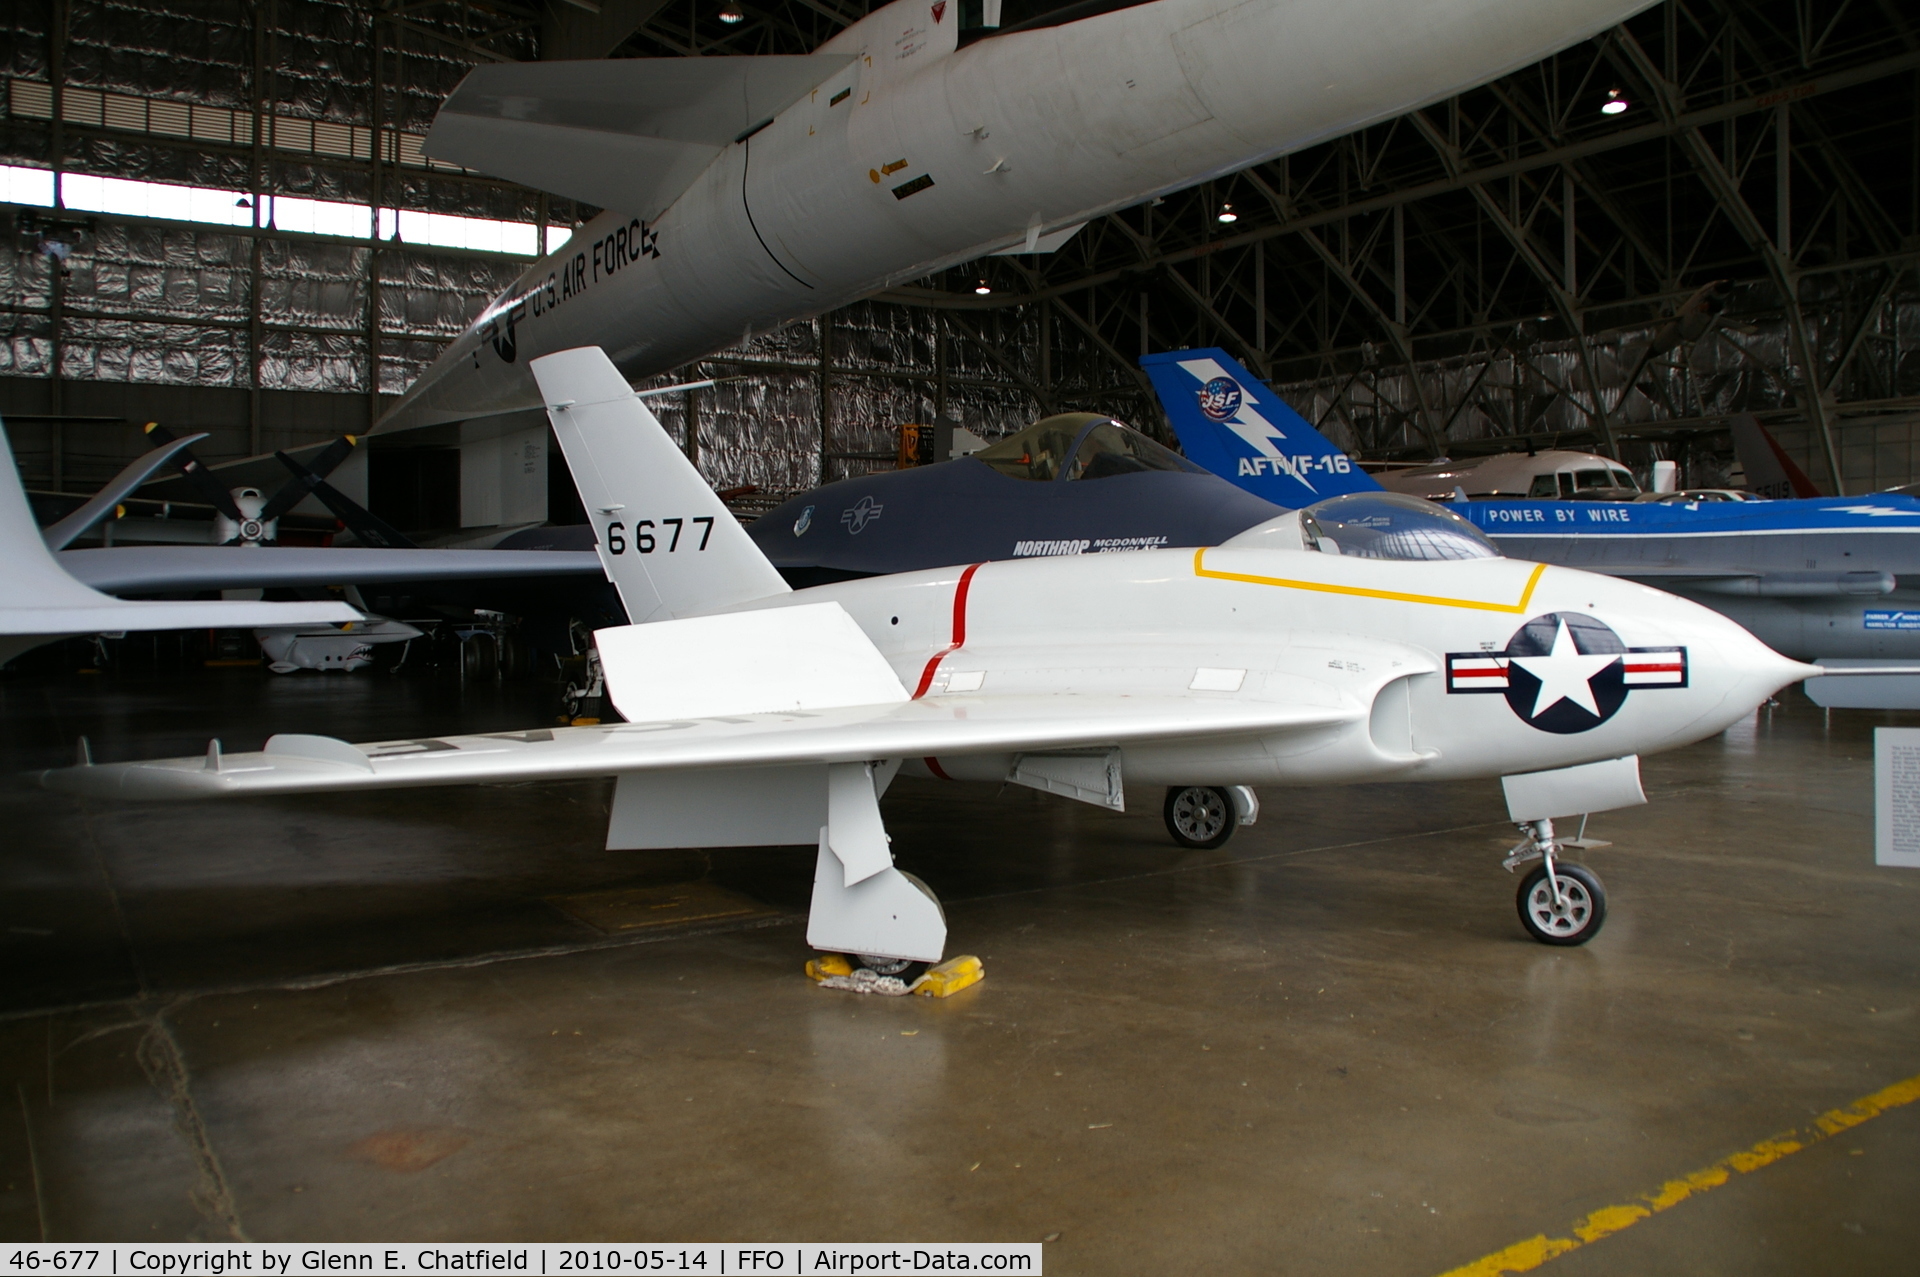 46-677, 1946 Northrop X-4 Bantam C/N Not found (46-677), At the National Museum of the USAF